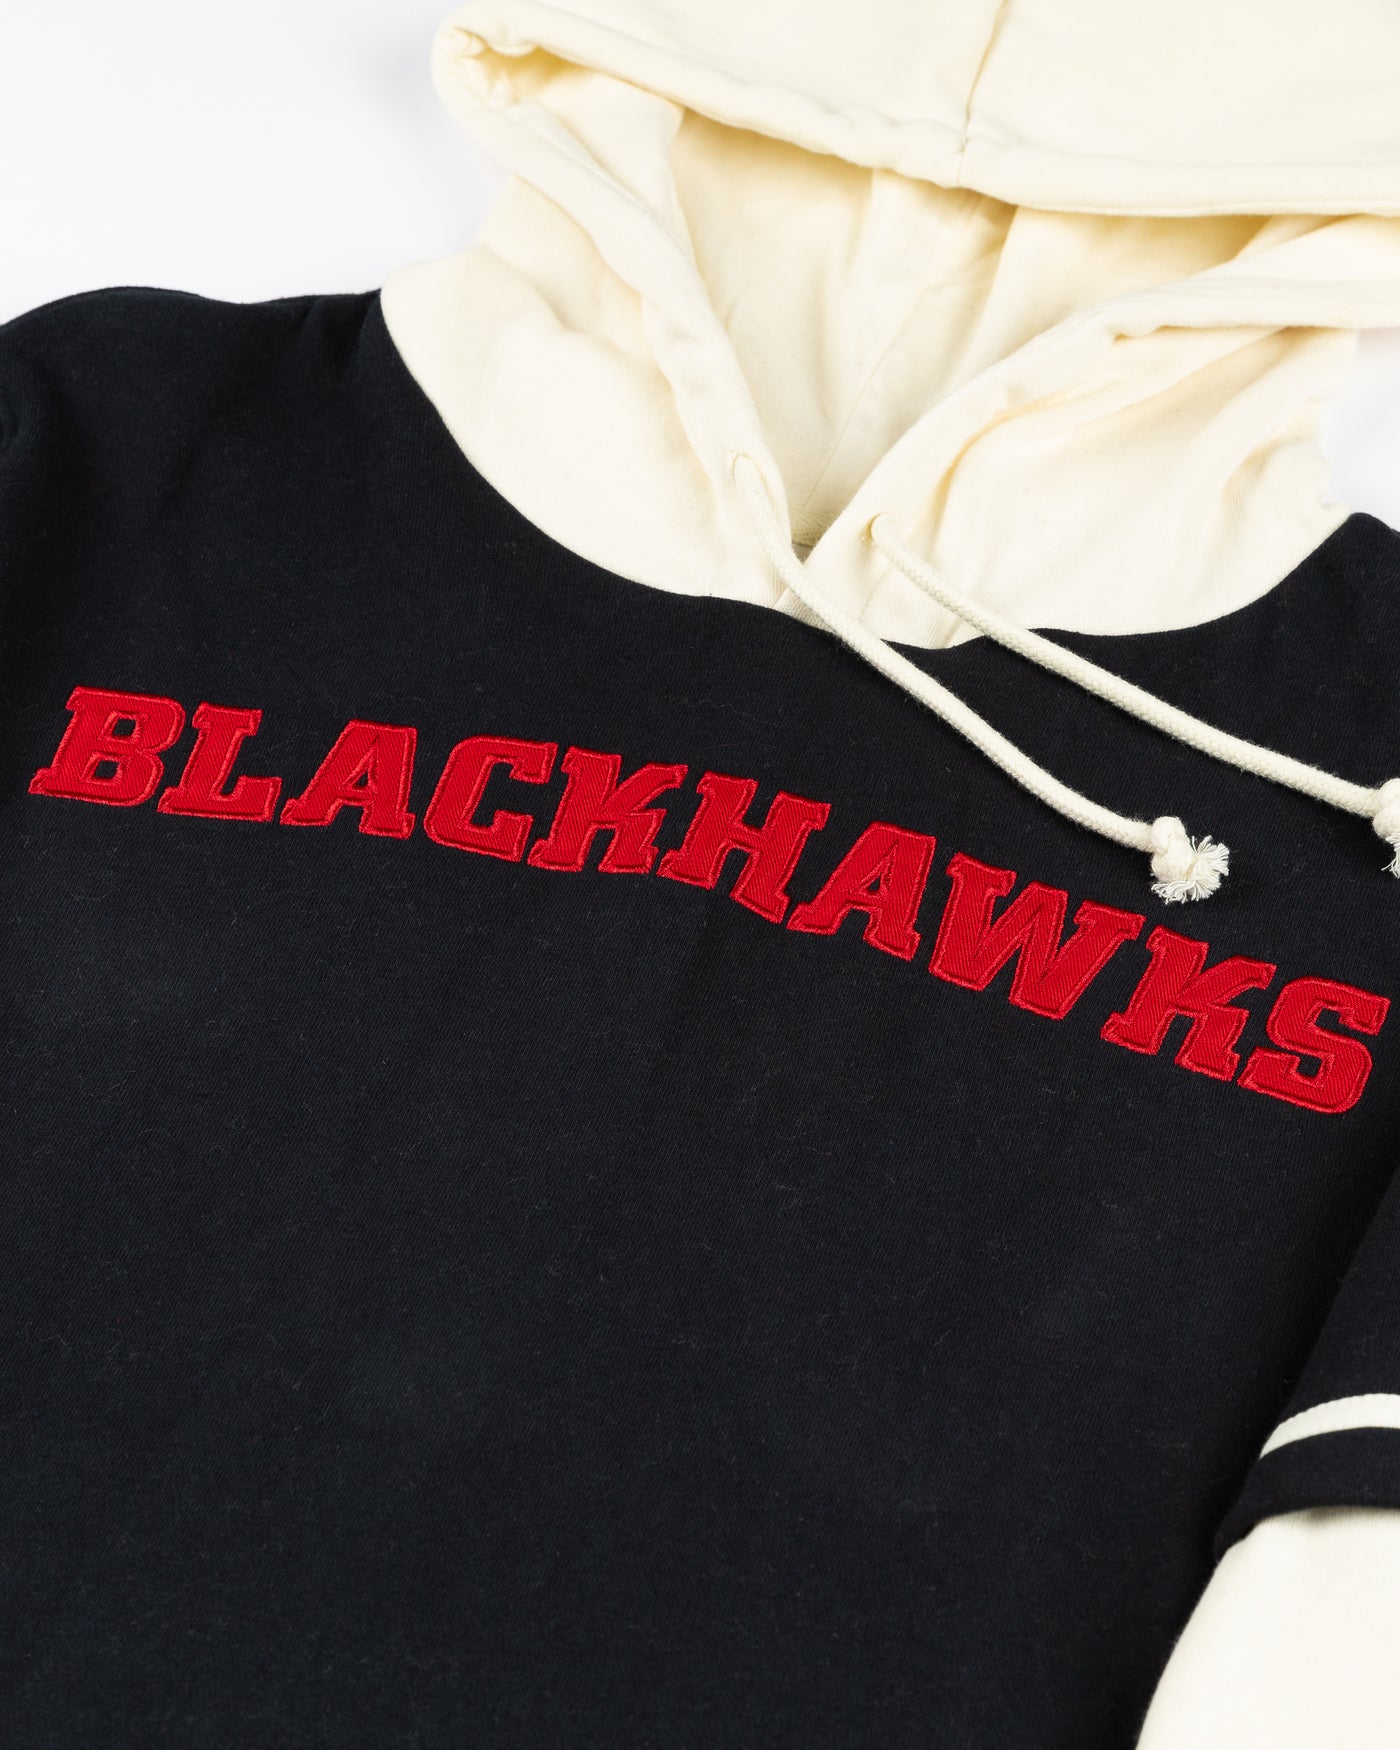 '47 brand layered hoodie with Chicago Blackhawks wordmark on front and primary and secondary logos on shoulders - detail lay flat